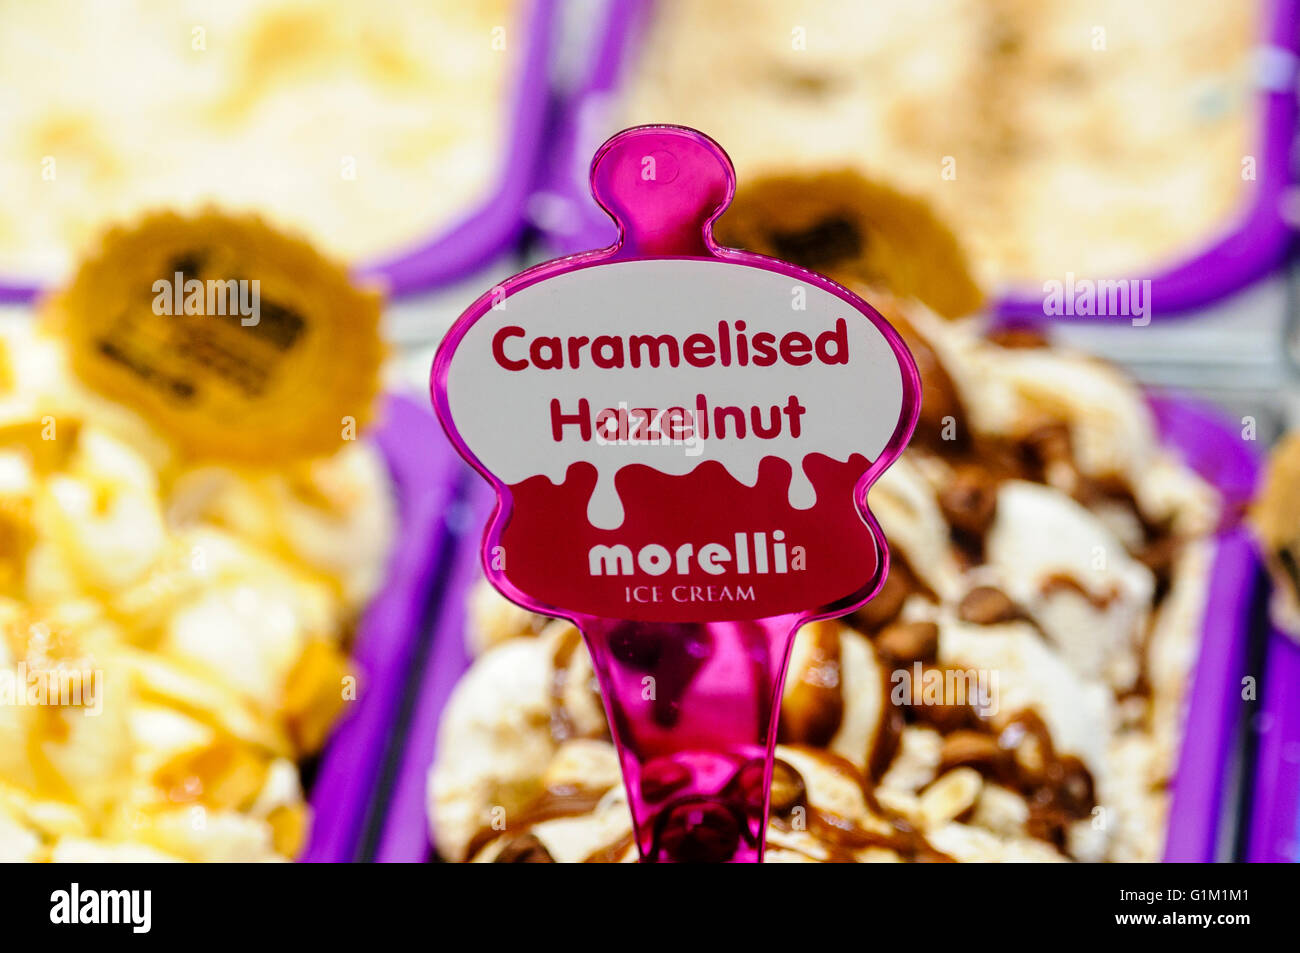 Tub of Caramelised Hazelnut ice-cream from the famous Morelli store in Northern Ireland. Stock Photo